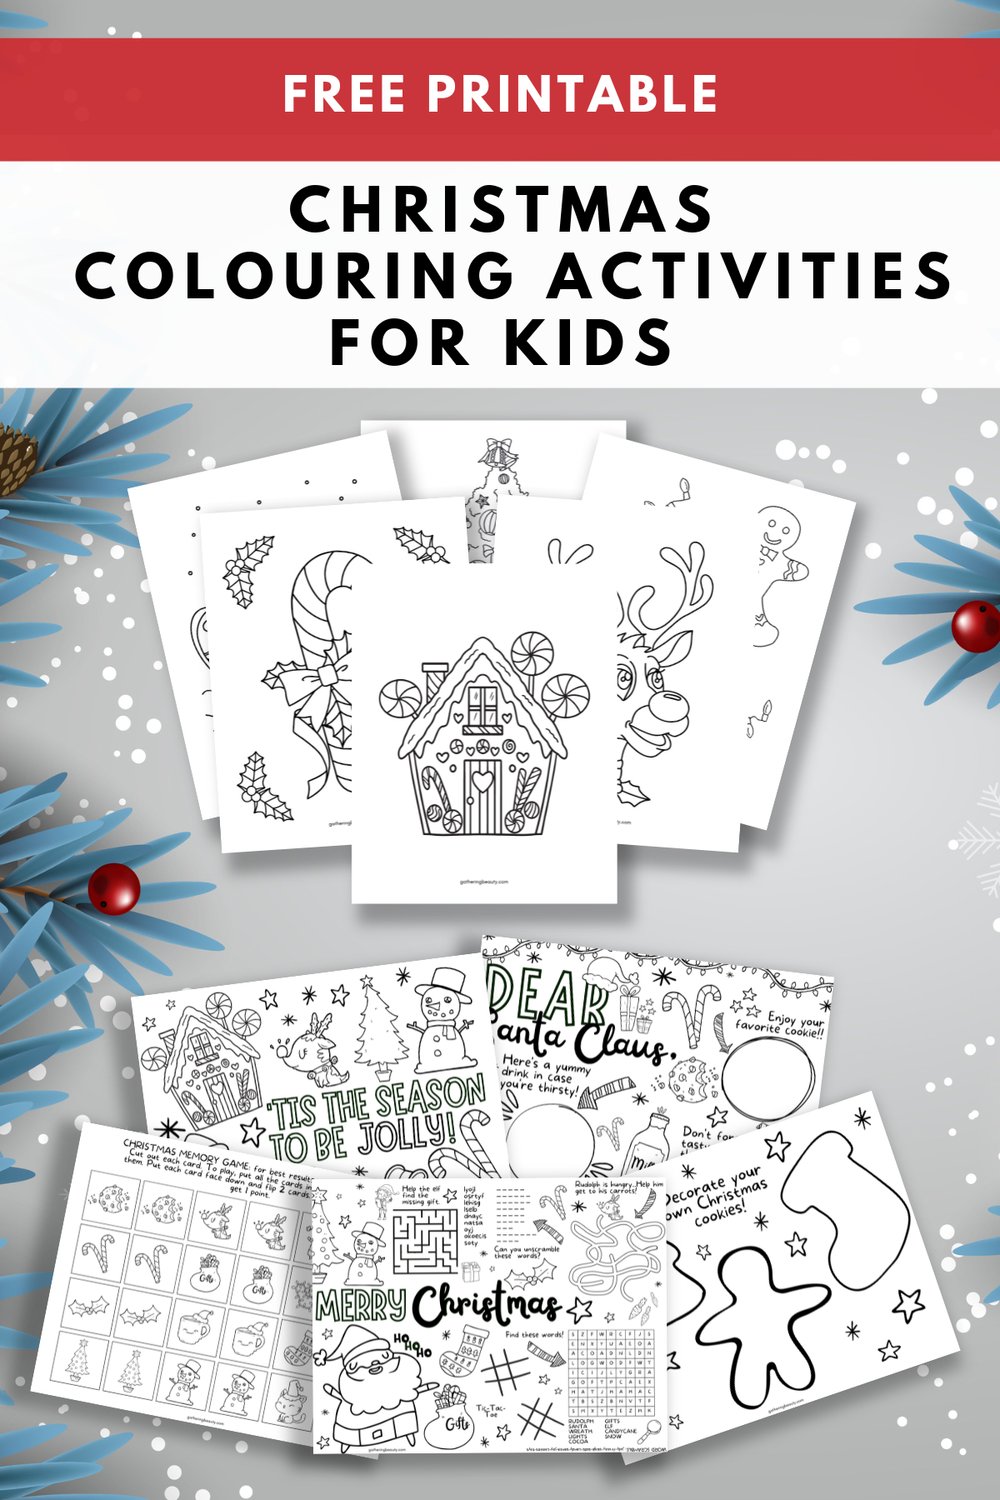 Christmas Coloring Activities For Kids - Free Printable ...